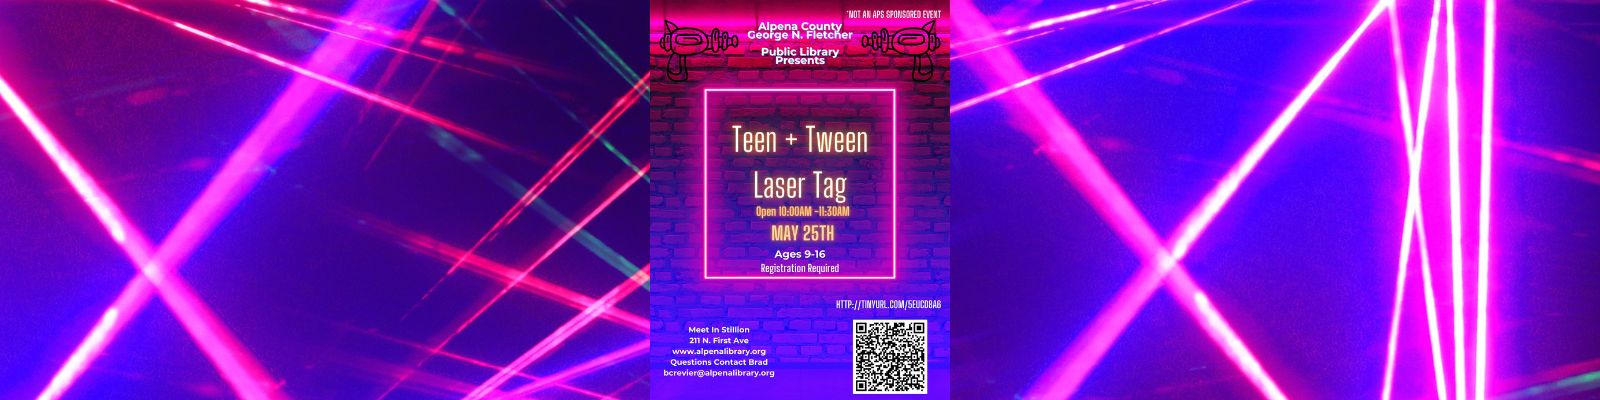 Laser Tag feature graphic